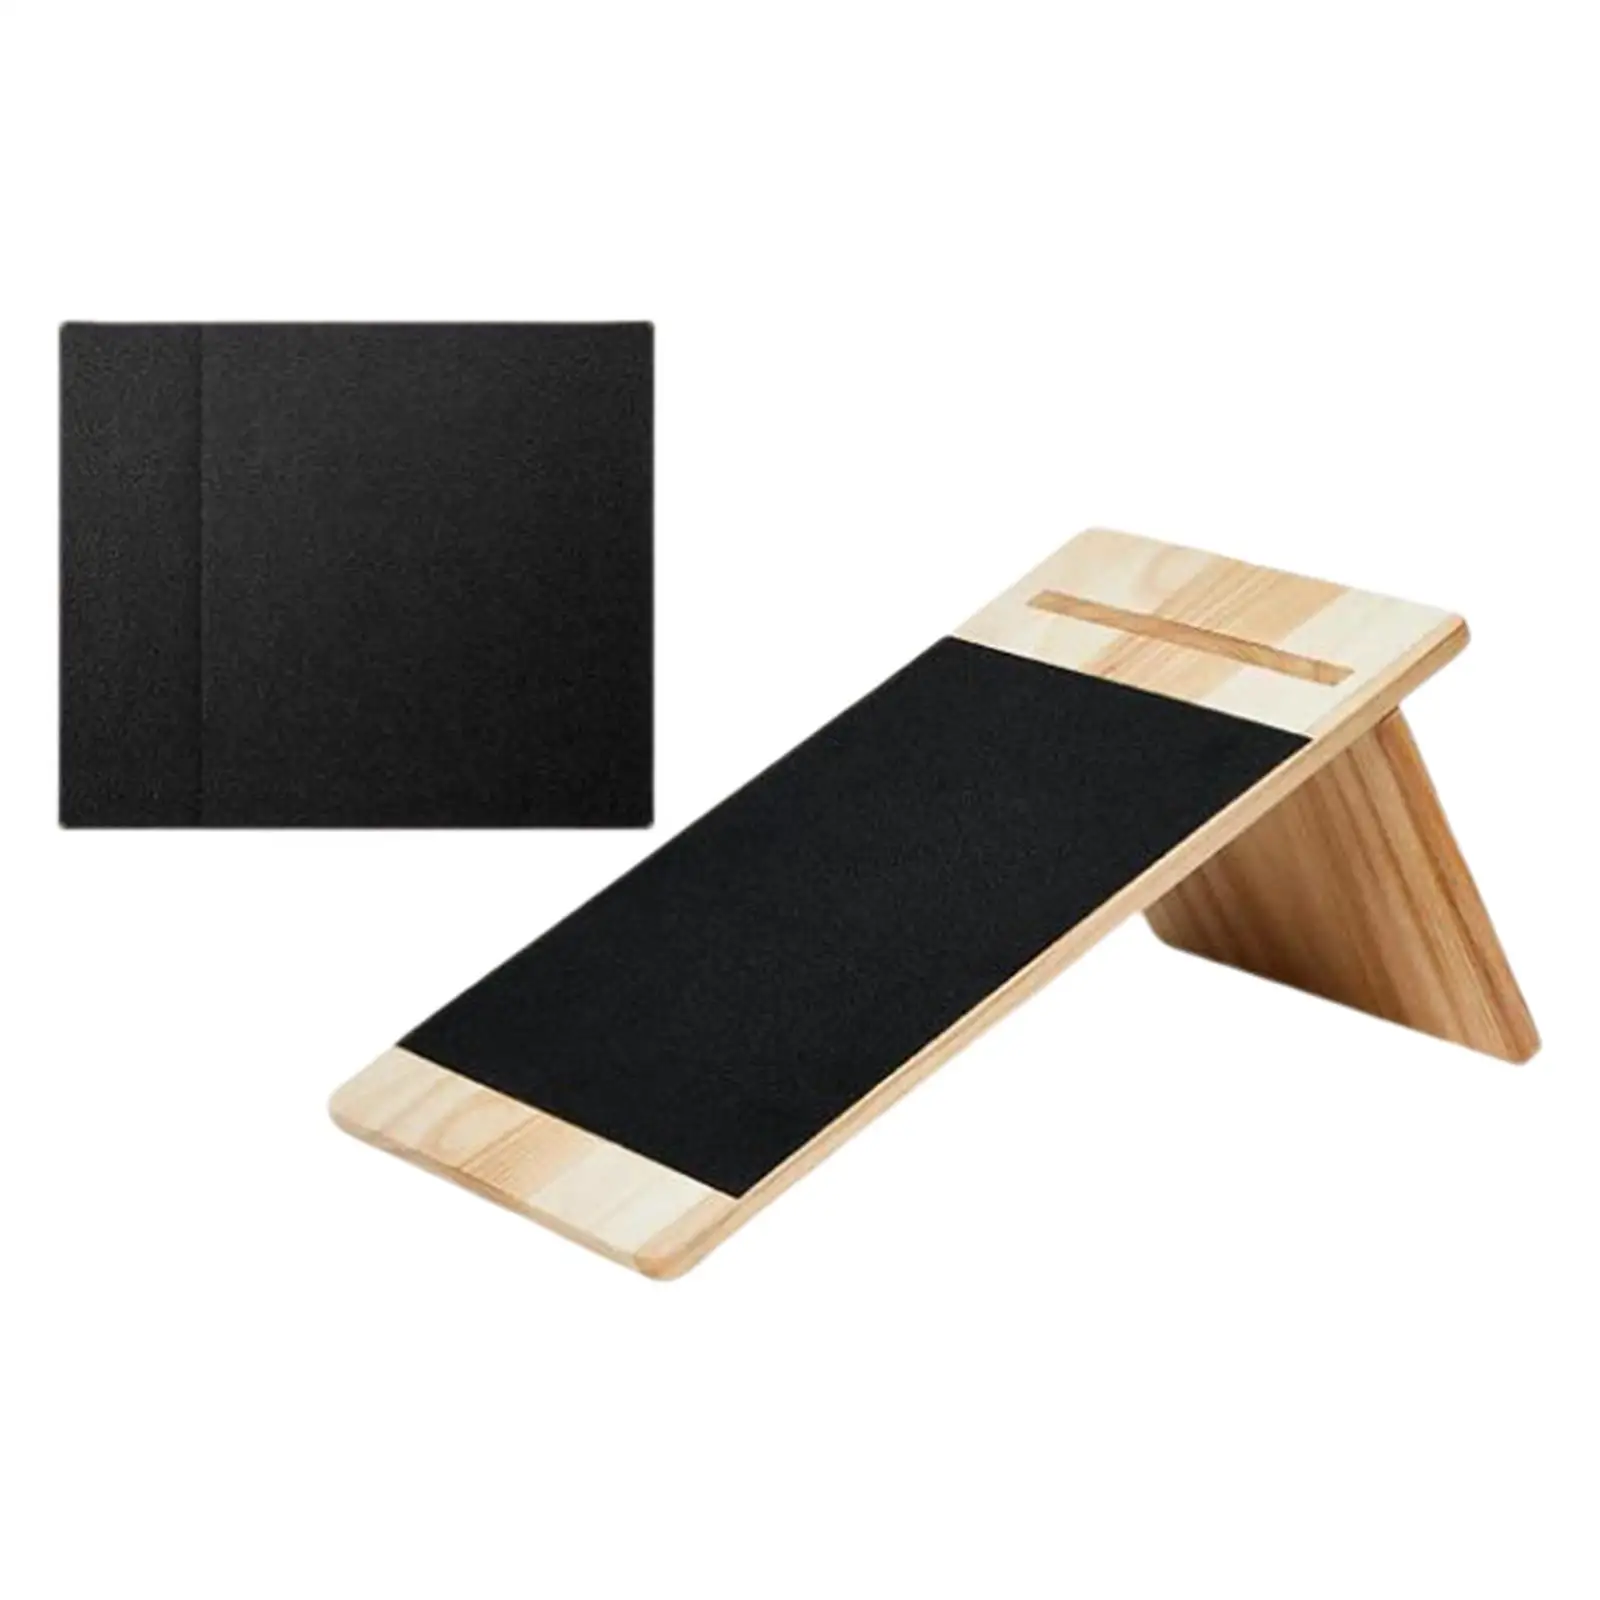 Dog Scratch Pad for Nails Toy Wooden Interactive Toy with Detachable Stand Nail Care Dog Nail Scratching Board for Dogs Cats